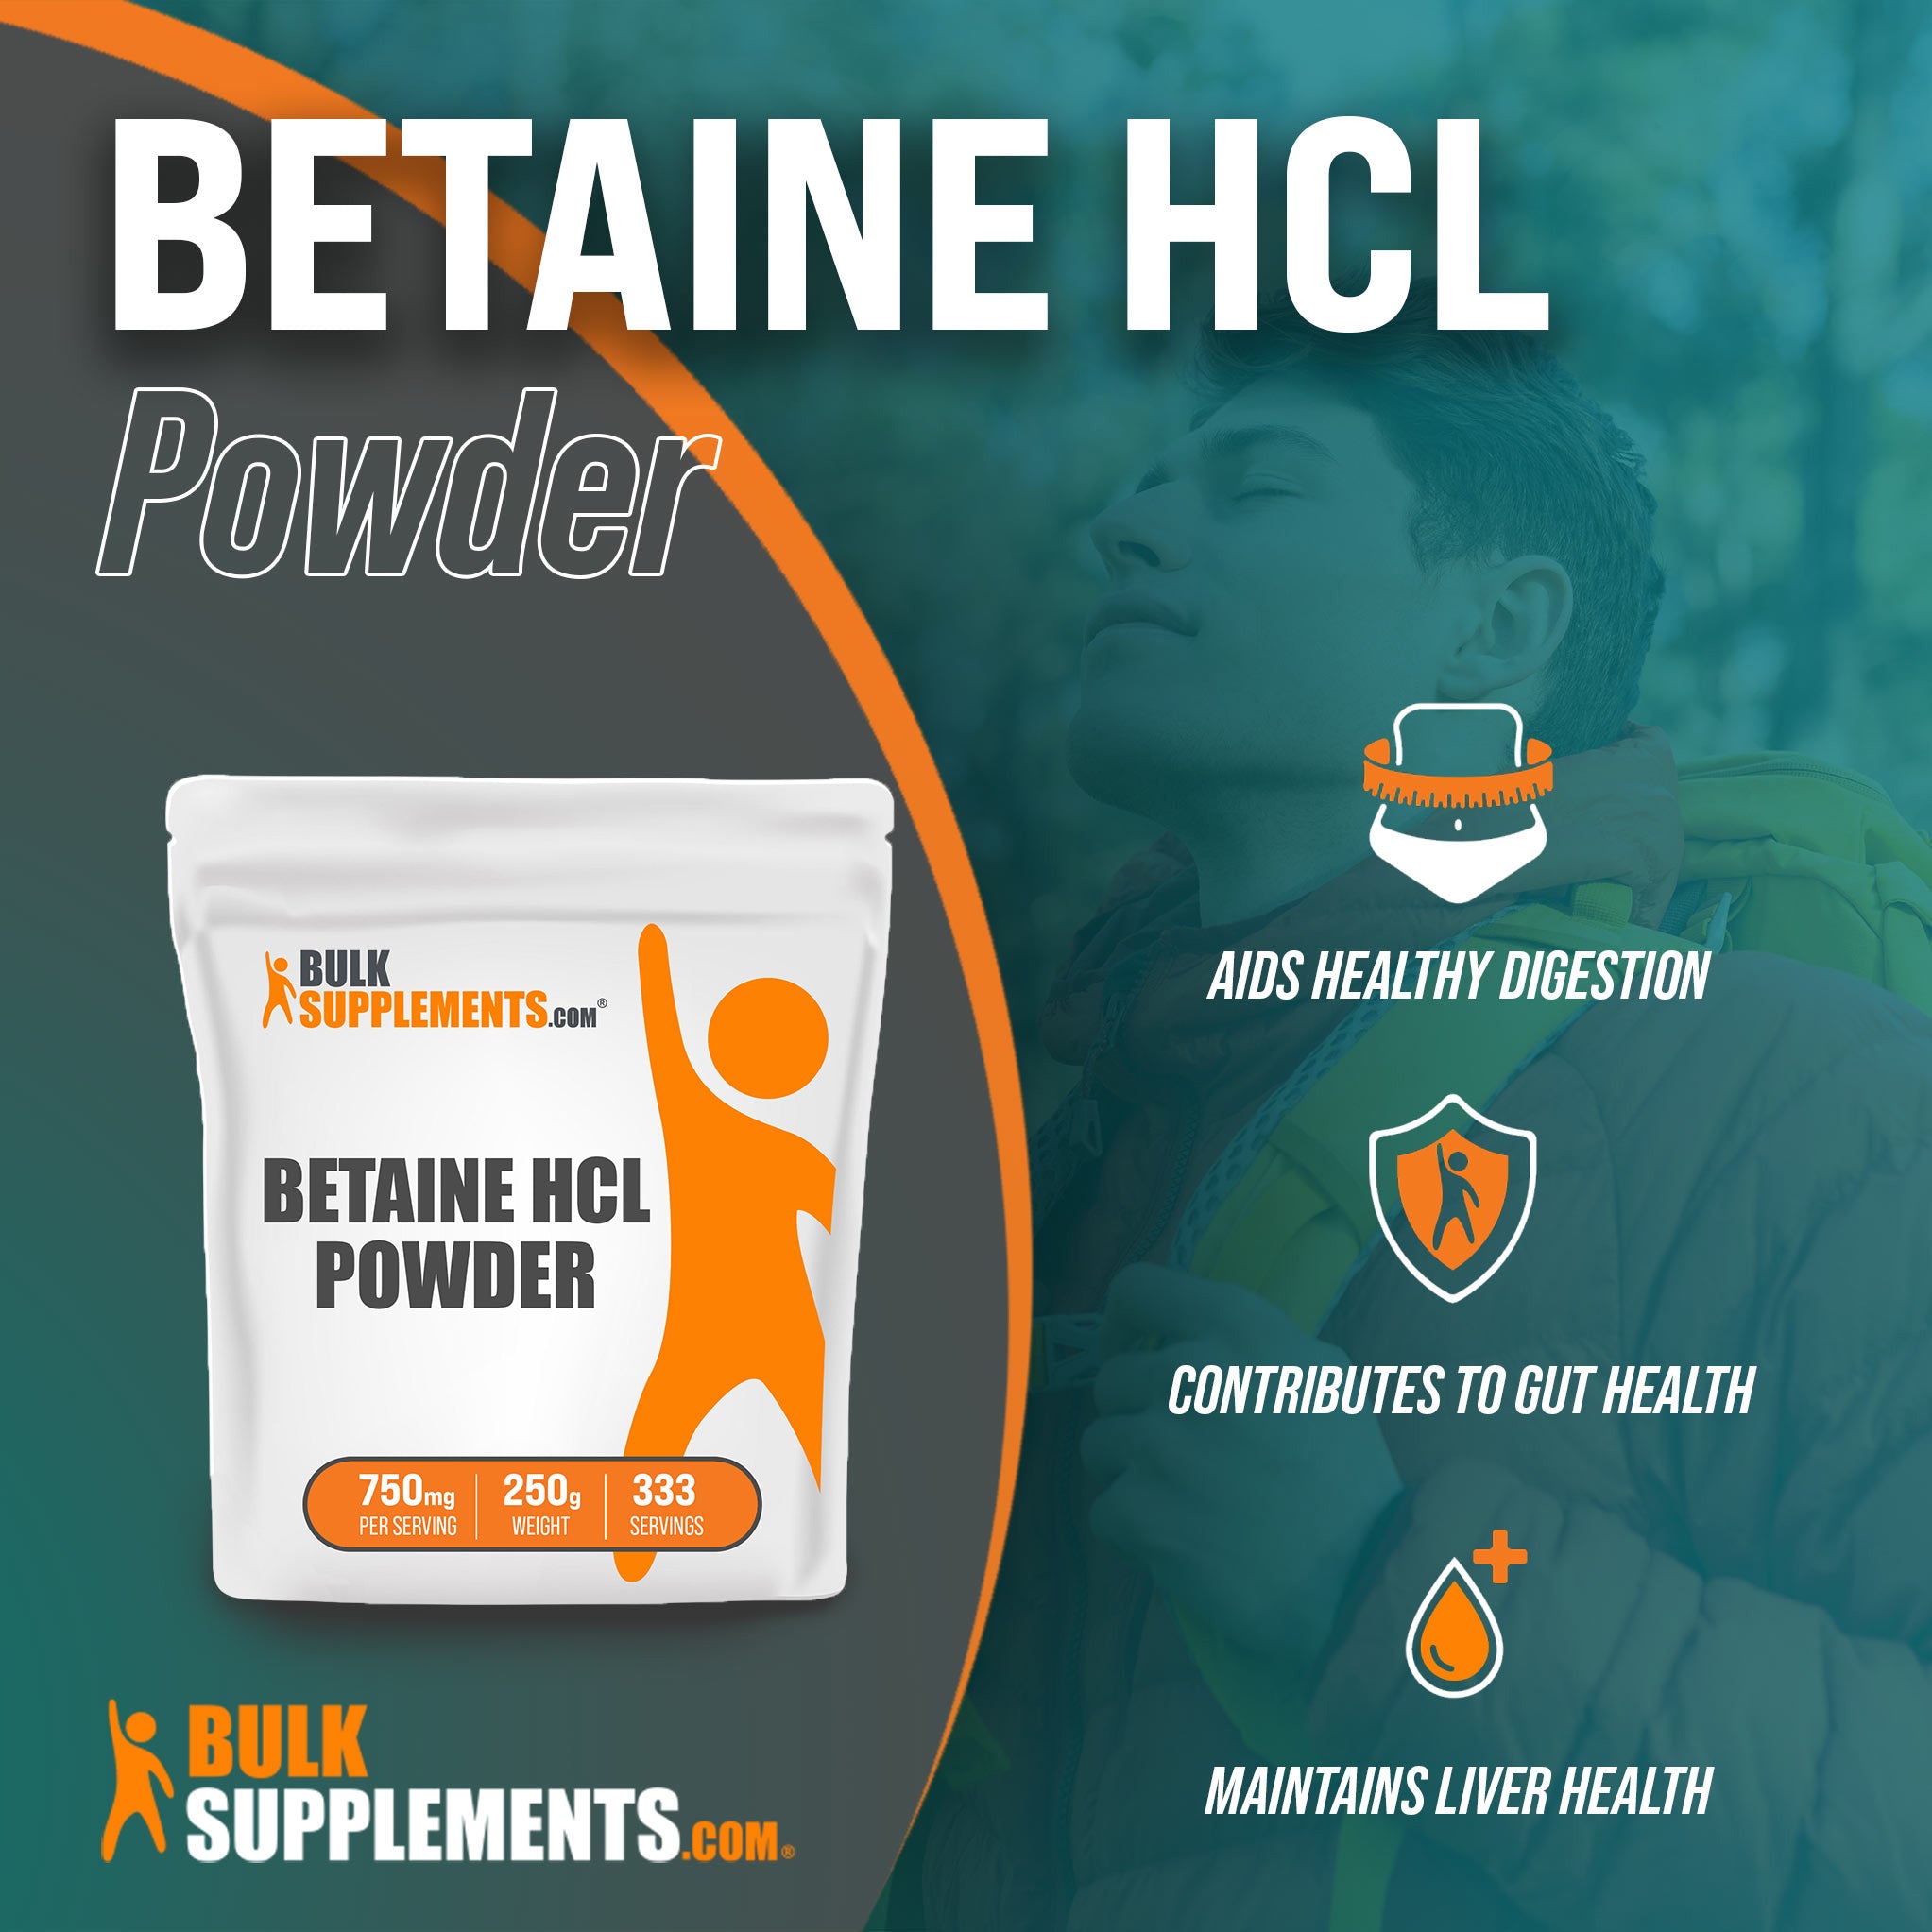 Betaine HCl 250g contains digestive enzymes